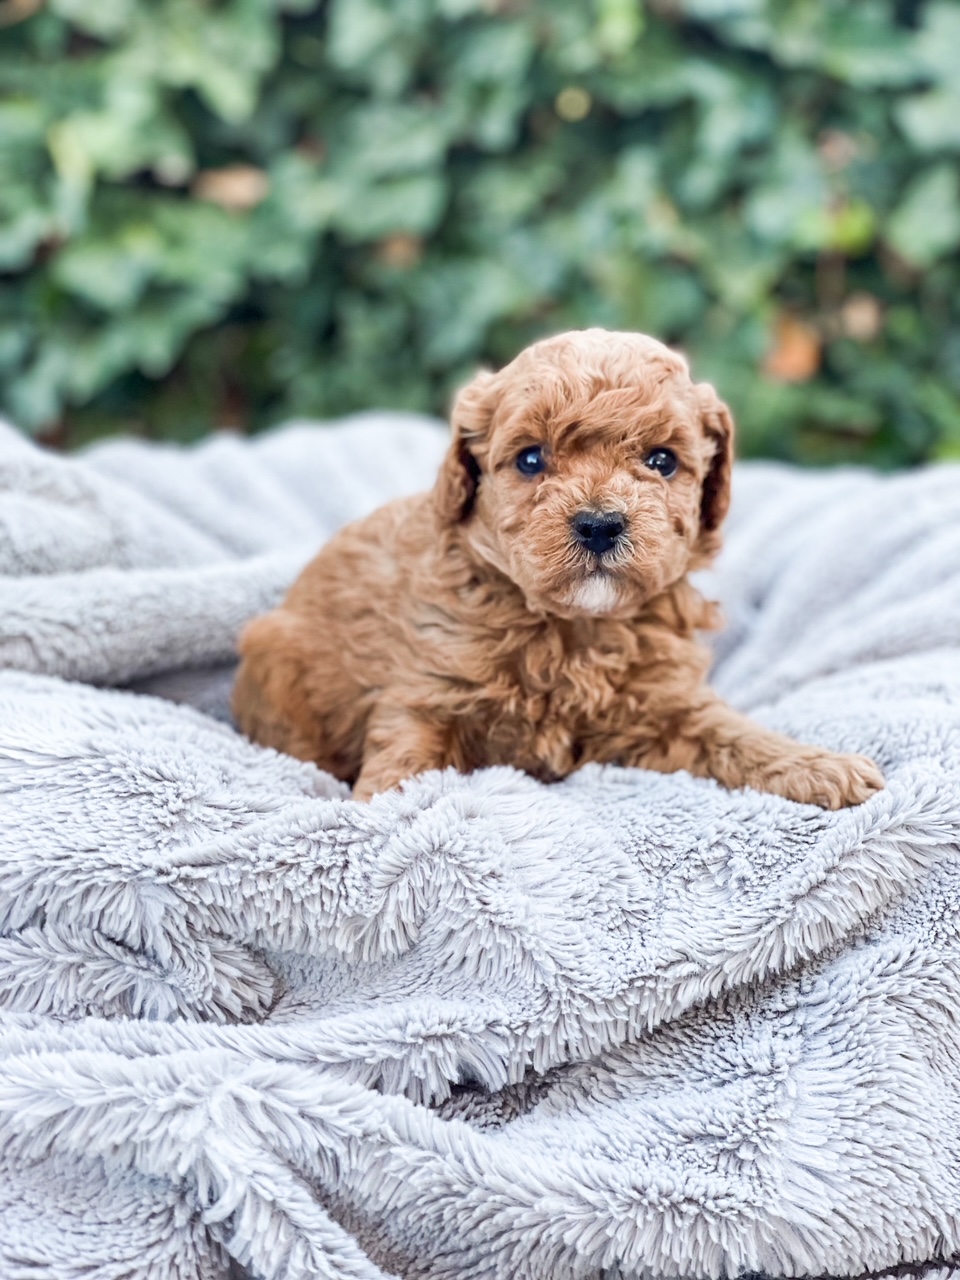 A small brown puppy with adorable eyes sits calmly on a soft blanket, displaying its innocent charm.